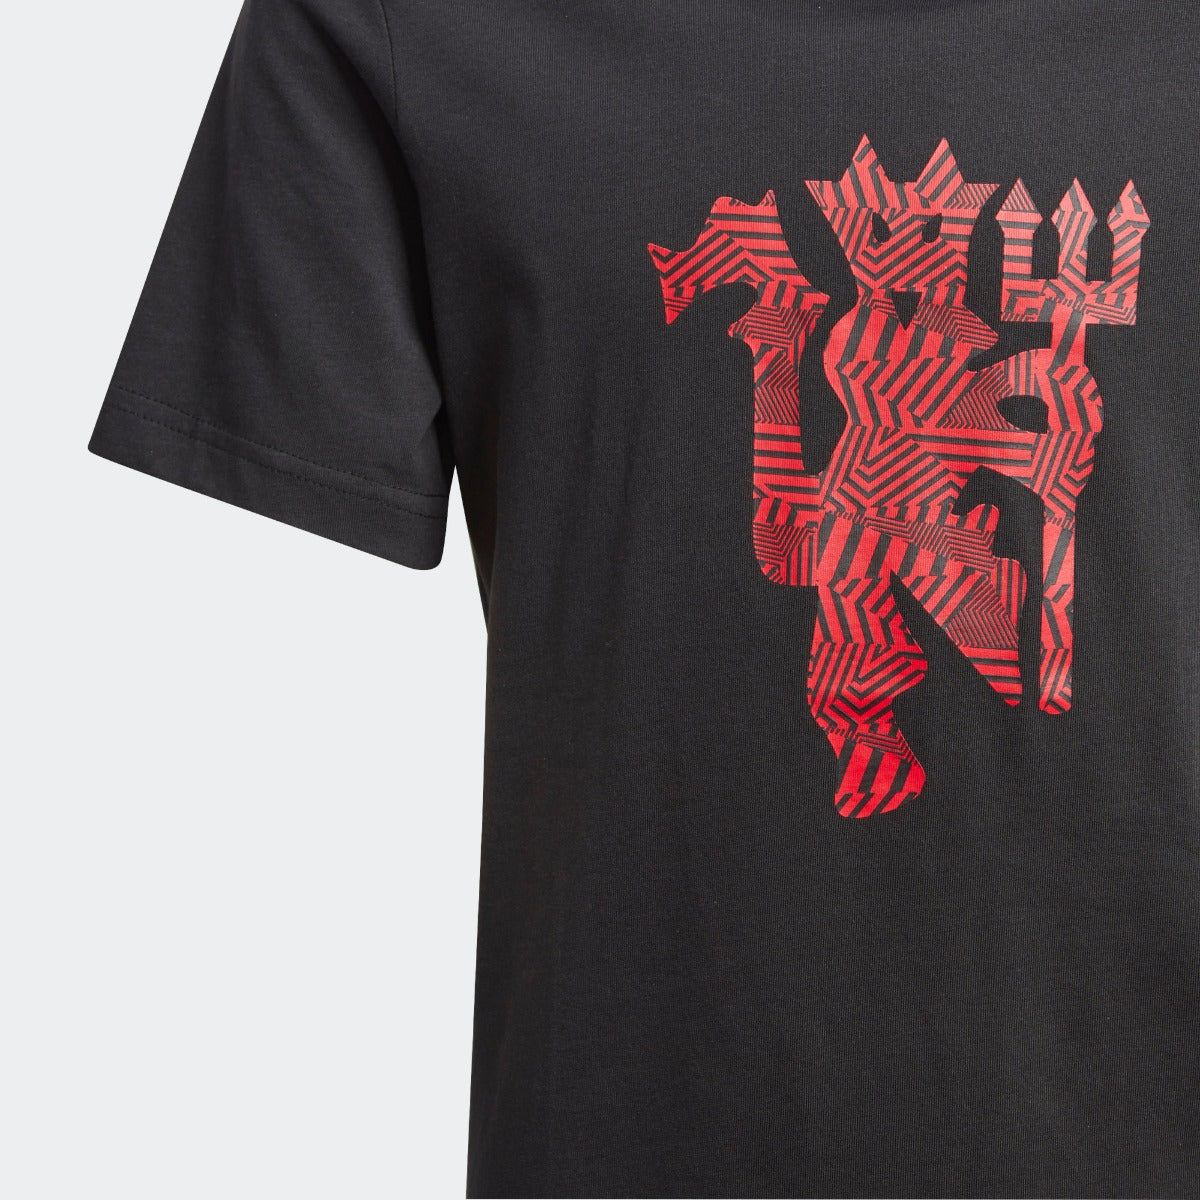 manchester united graphic tee